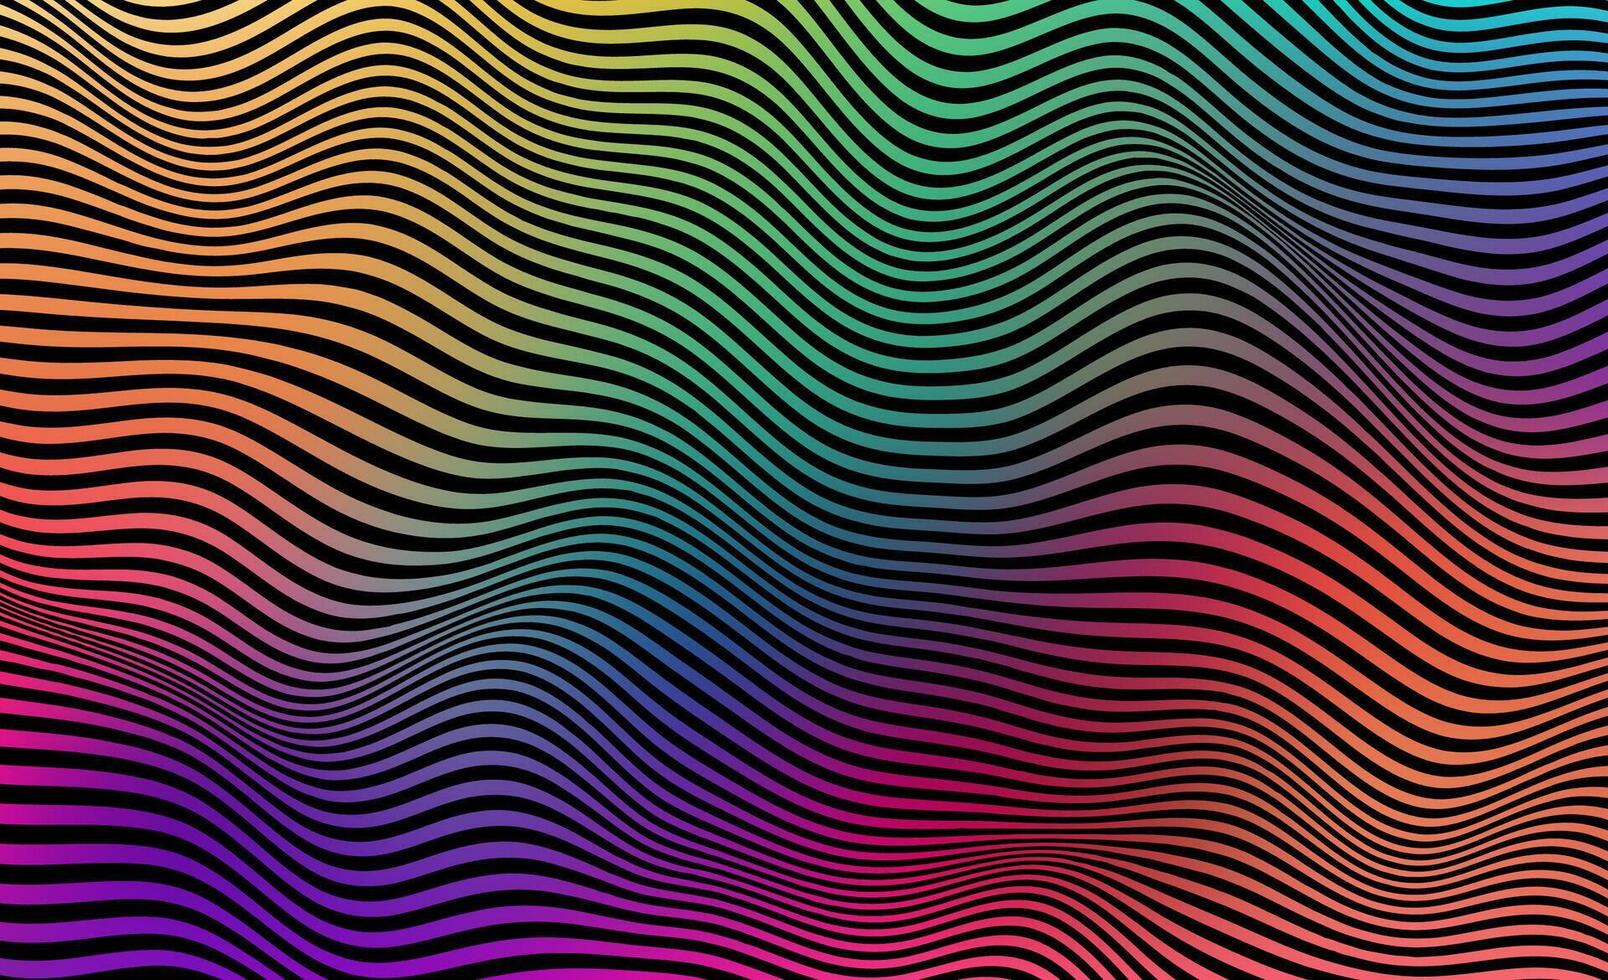 Abstract vector illustration with vibrant, flowing lines in a neon glitch style. Perfect for backgrounds, banners, and cards, blending retro and futuristic elements in a trendy, colorful design.